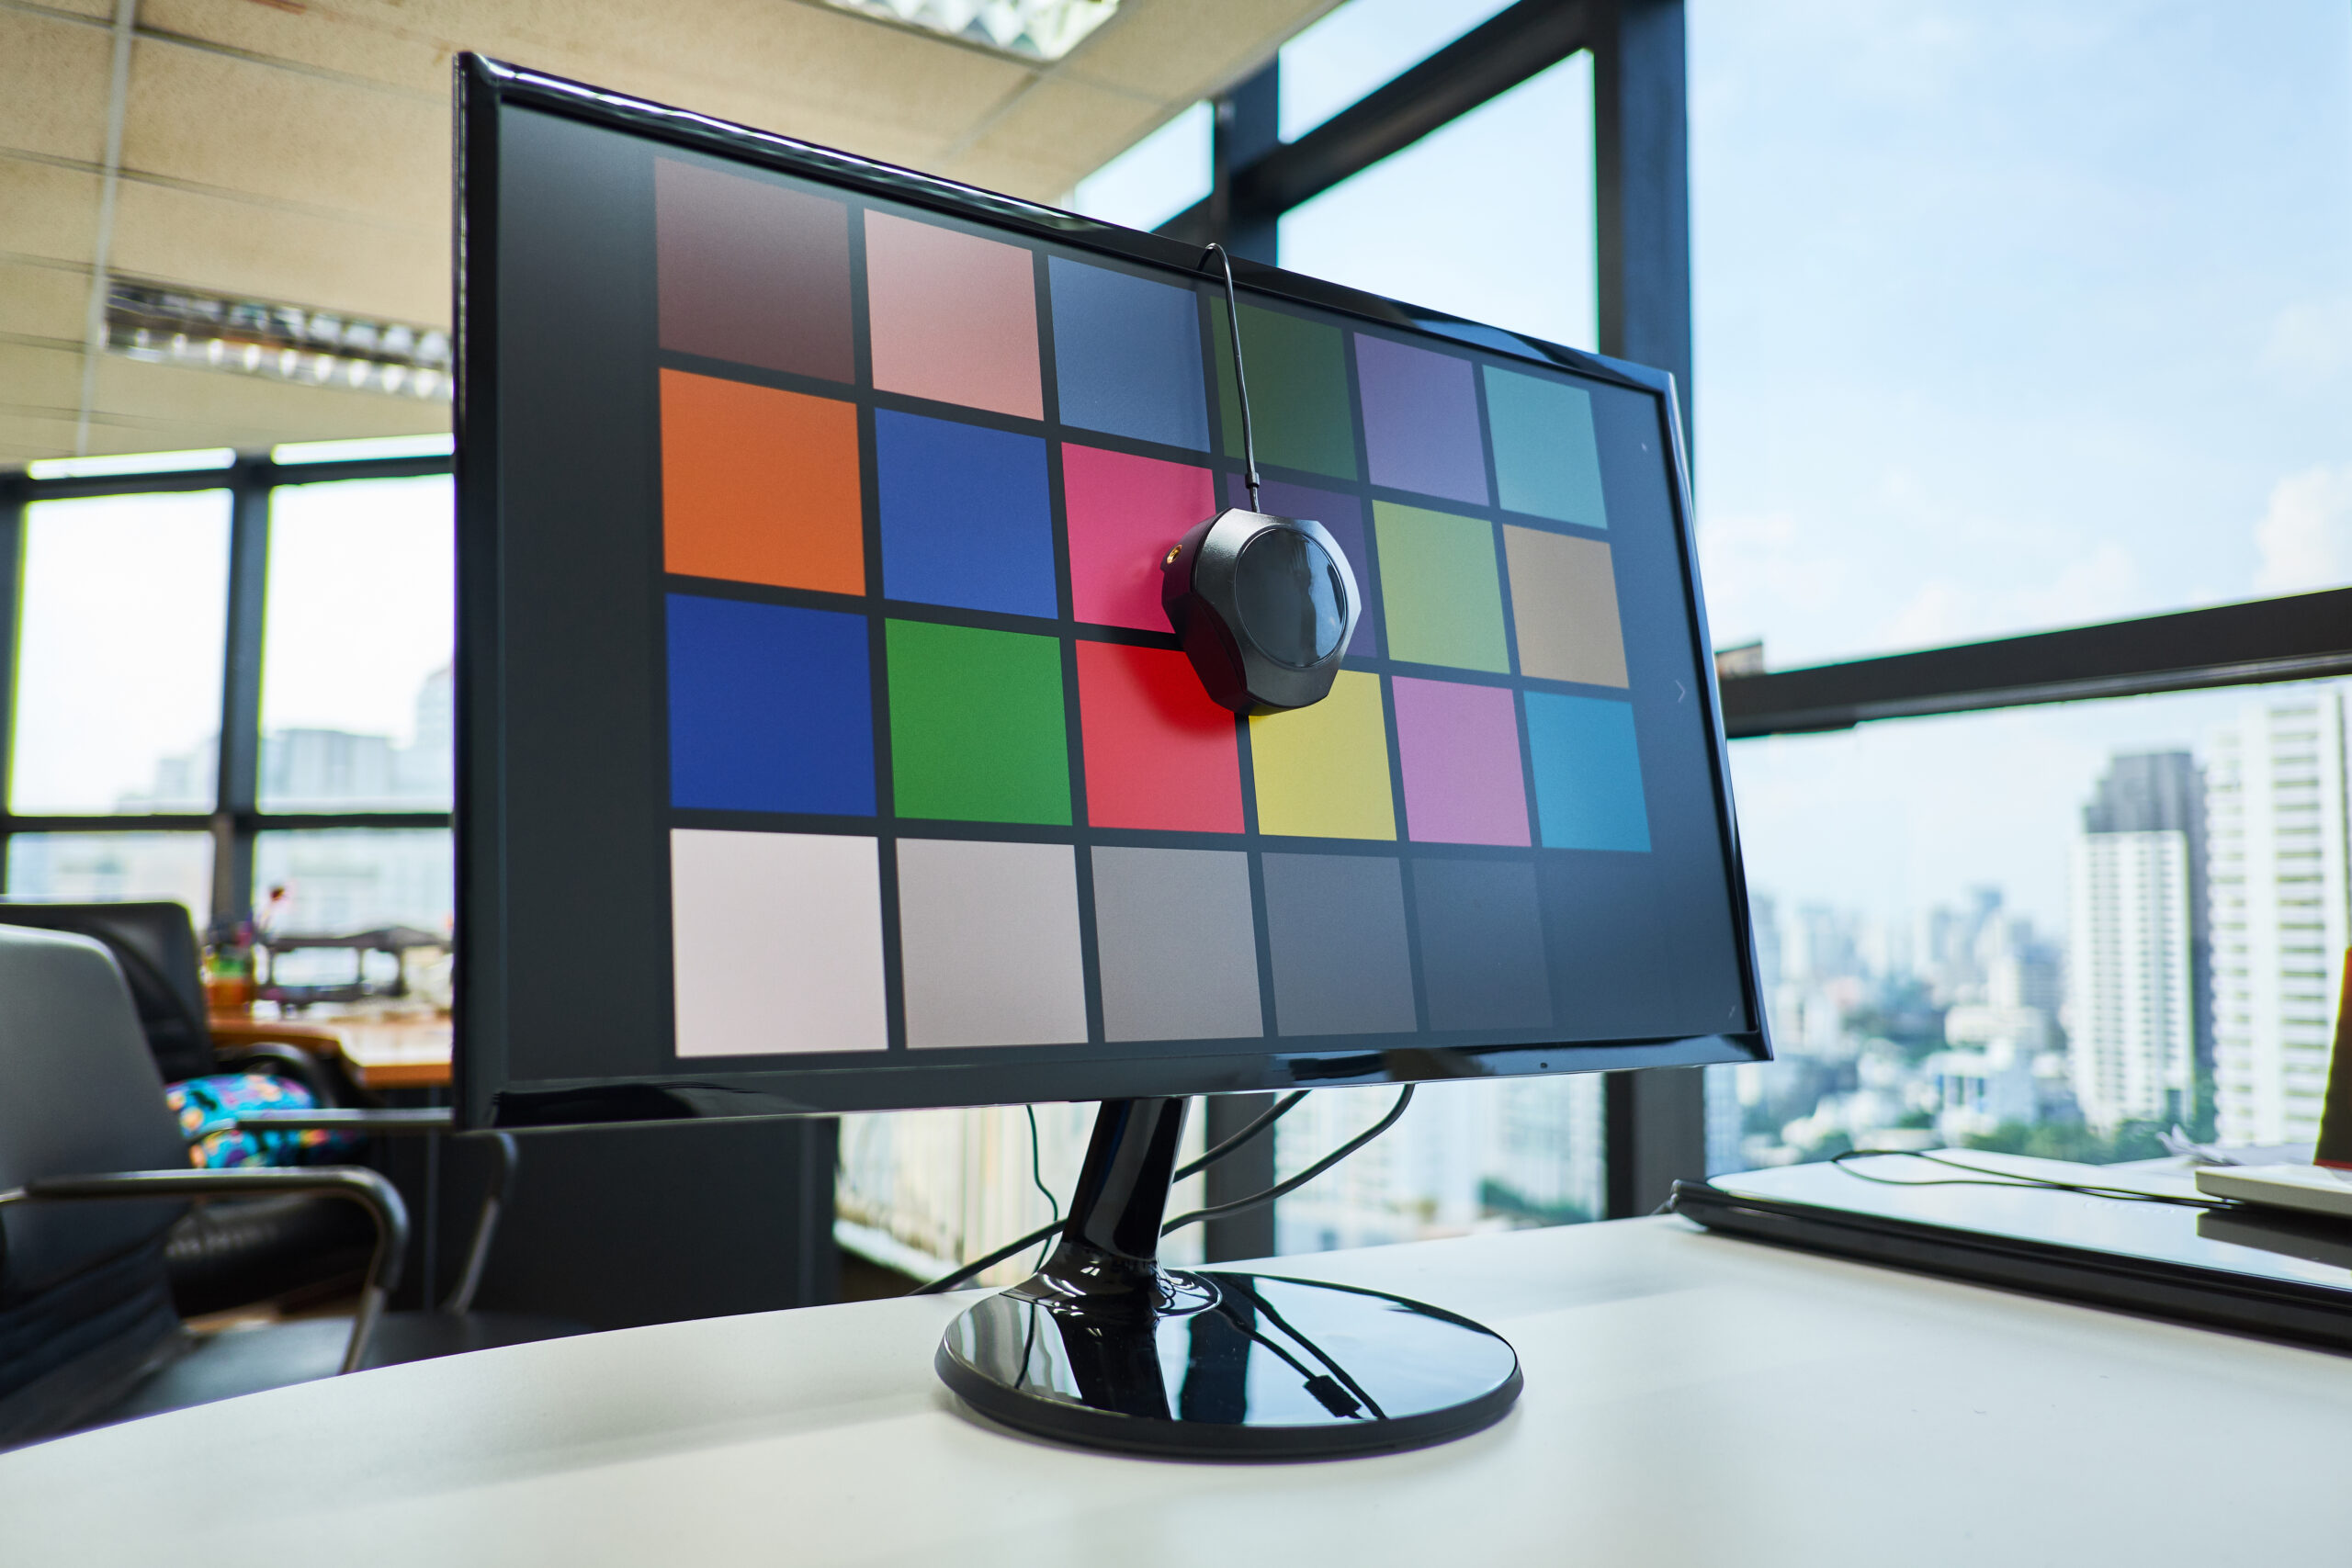 Geek insider, geekinsider, geekinsider. Com,, 5 signs it's time to calibrate your monitor, productivity